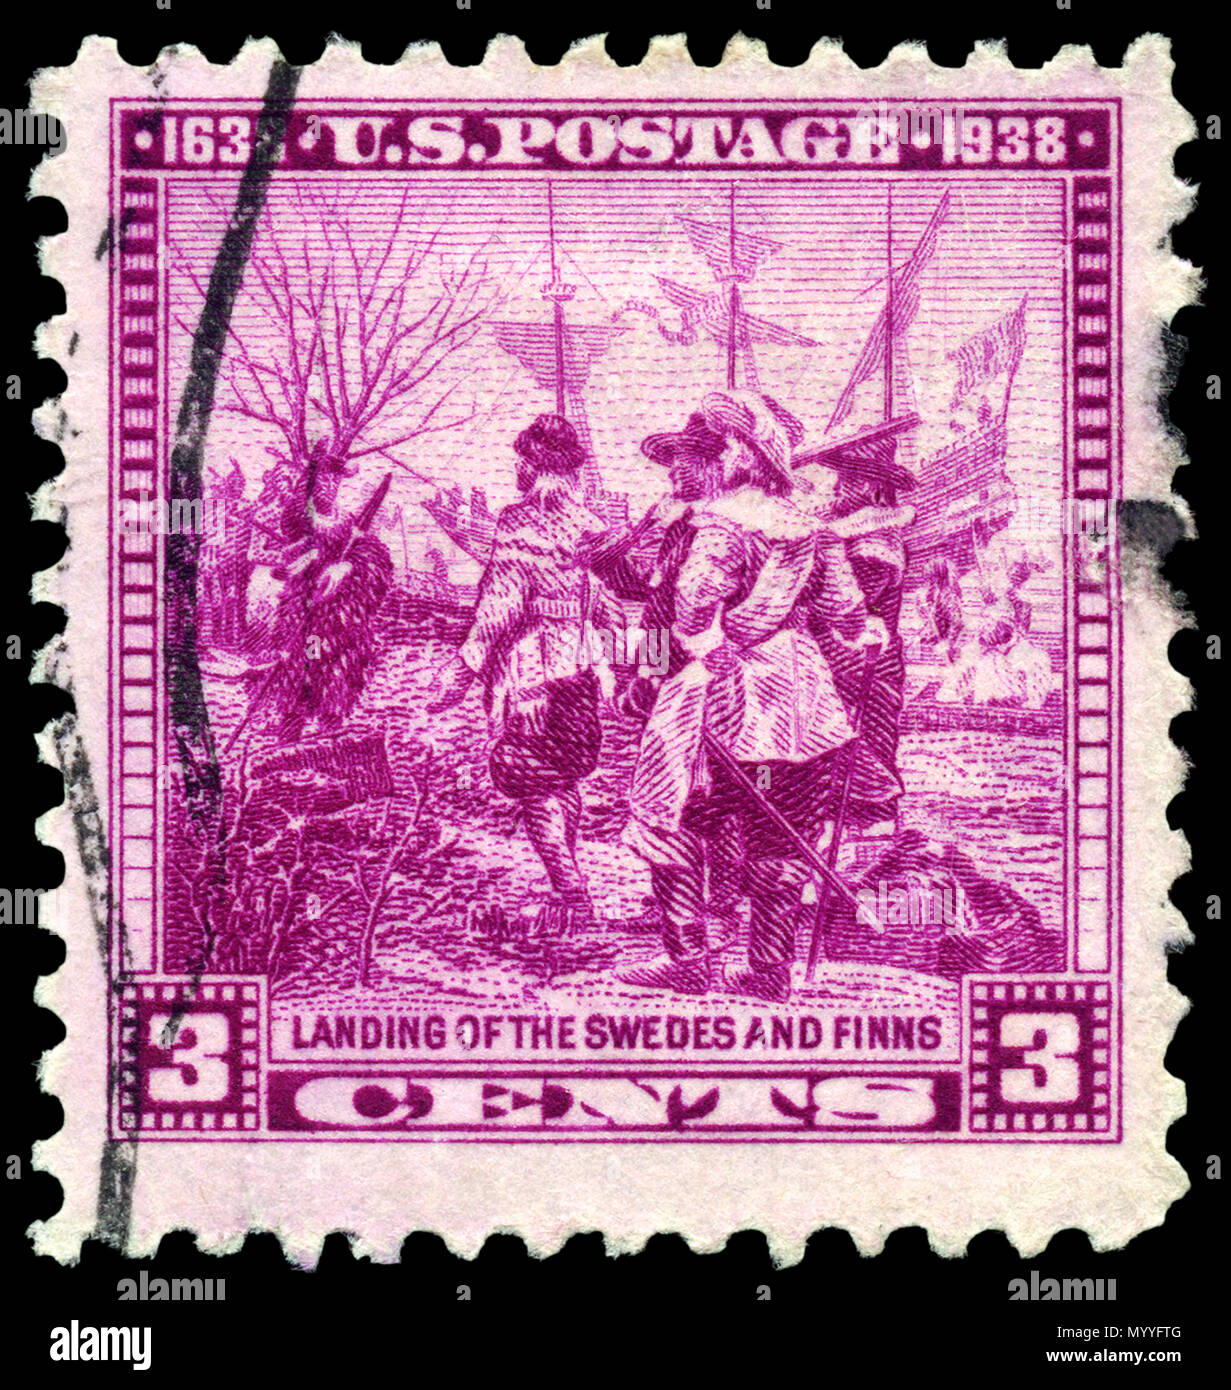 Landing of the Swedes and Finns Postage Stamp Stock Photo